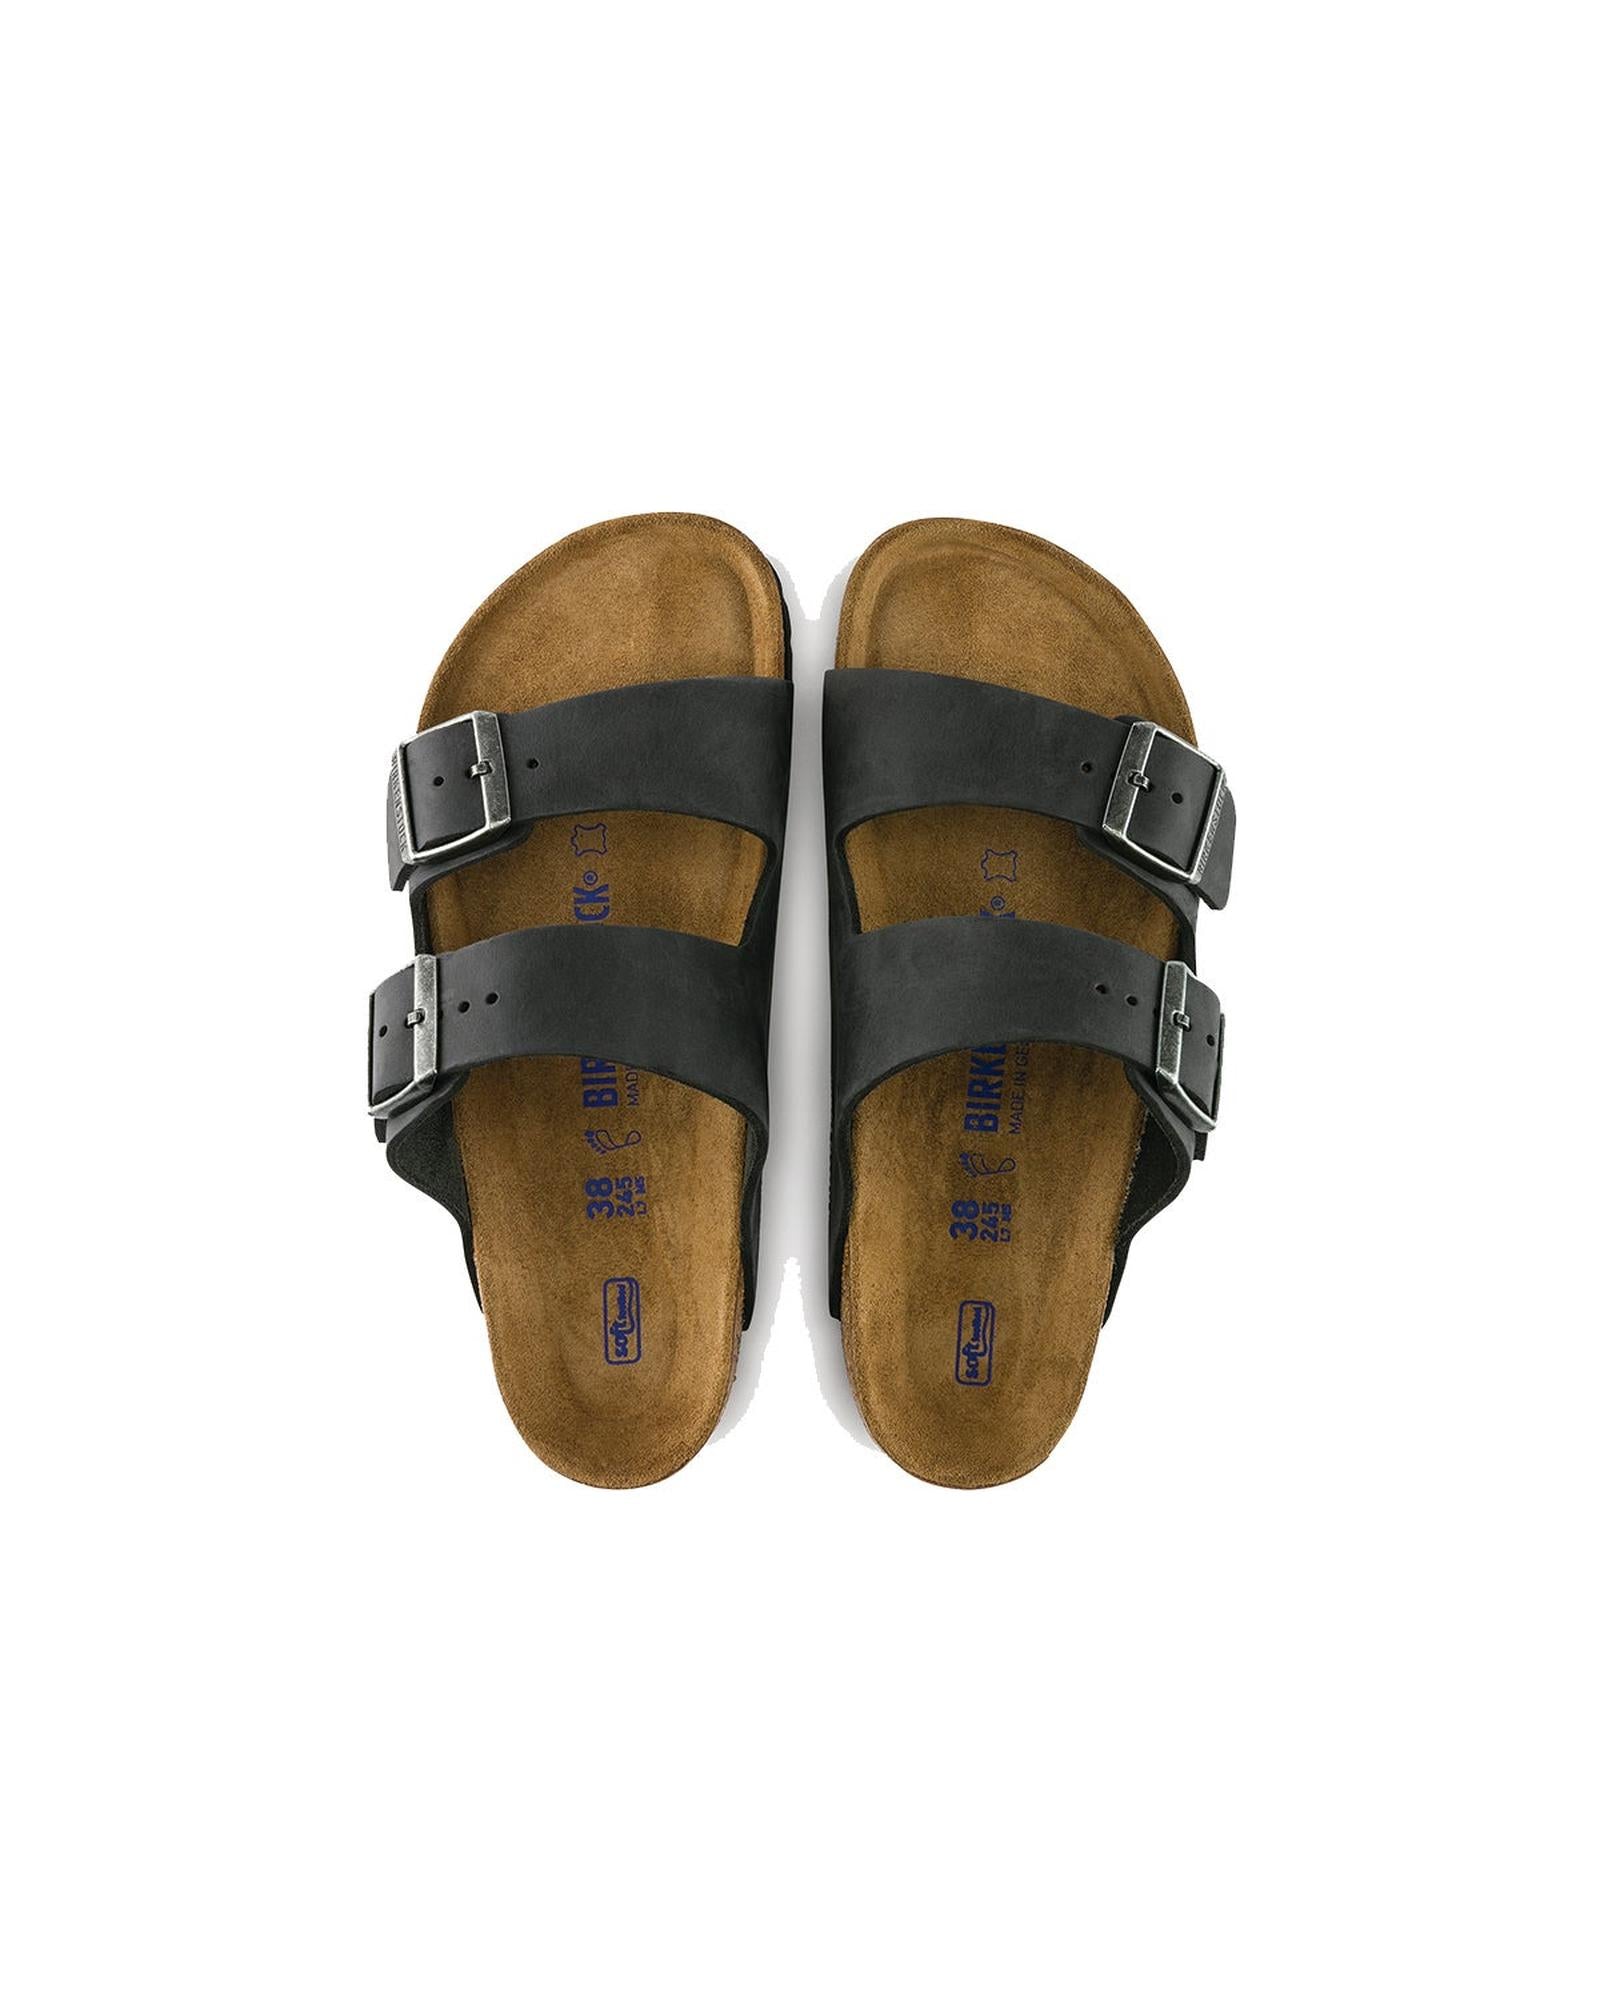 Oiled Leather 2-Strap Sandals with Soft Footbed - 36 EU